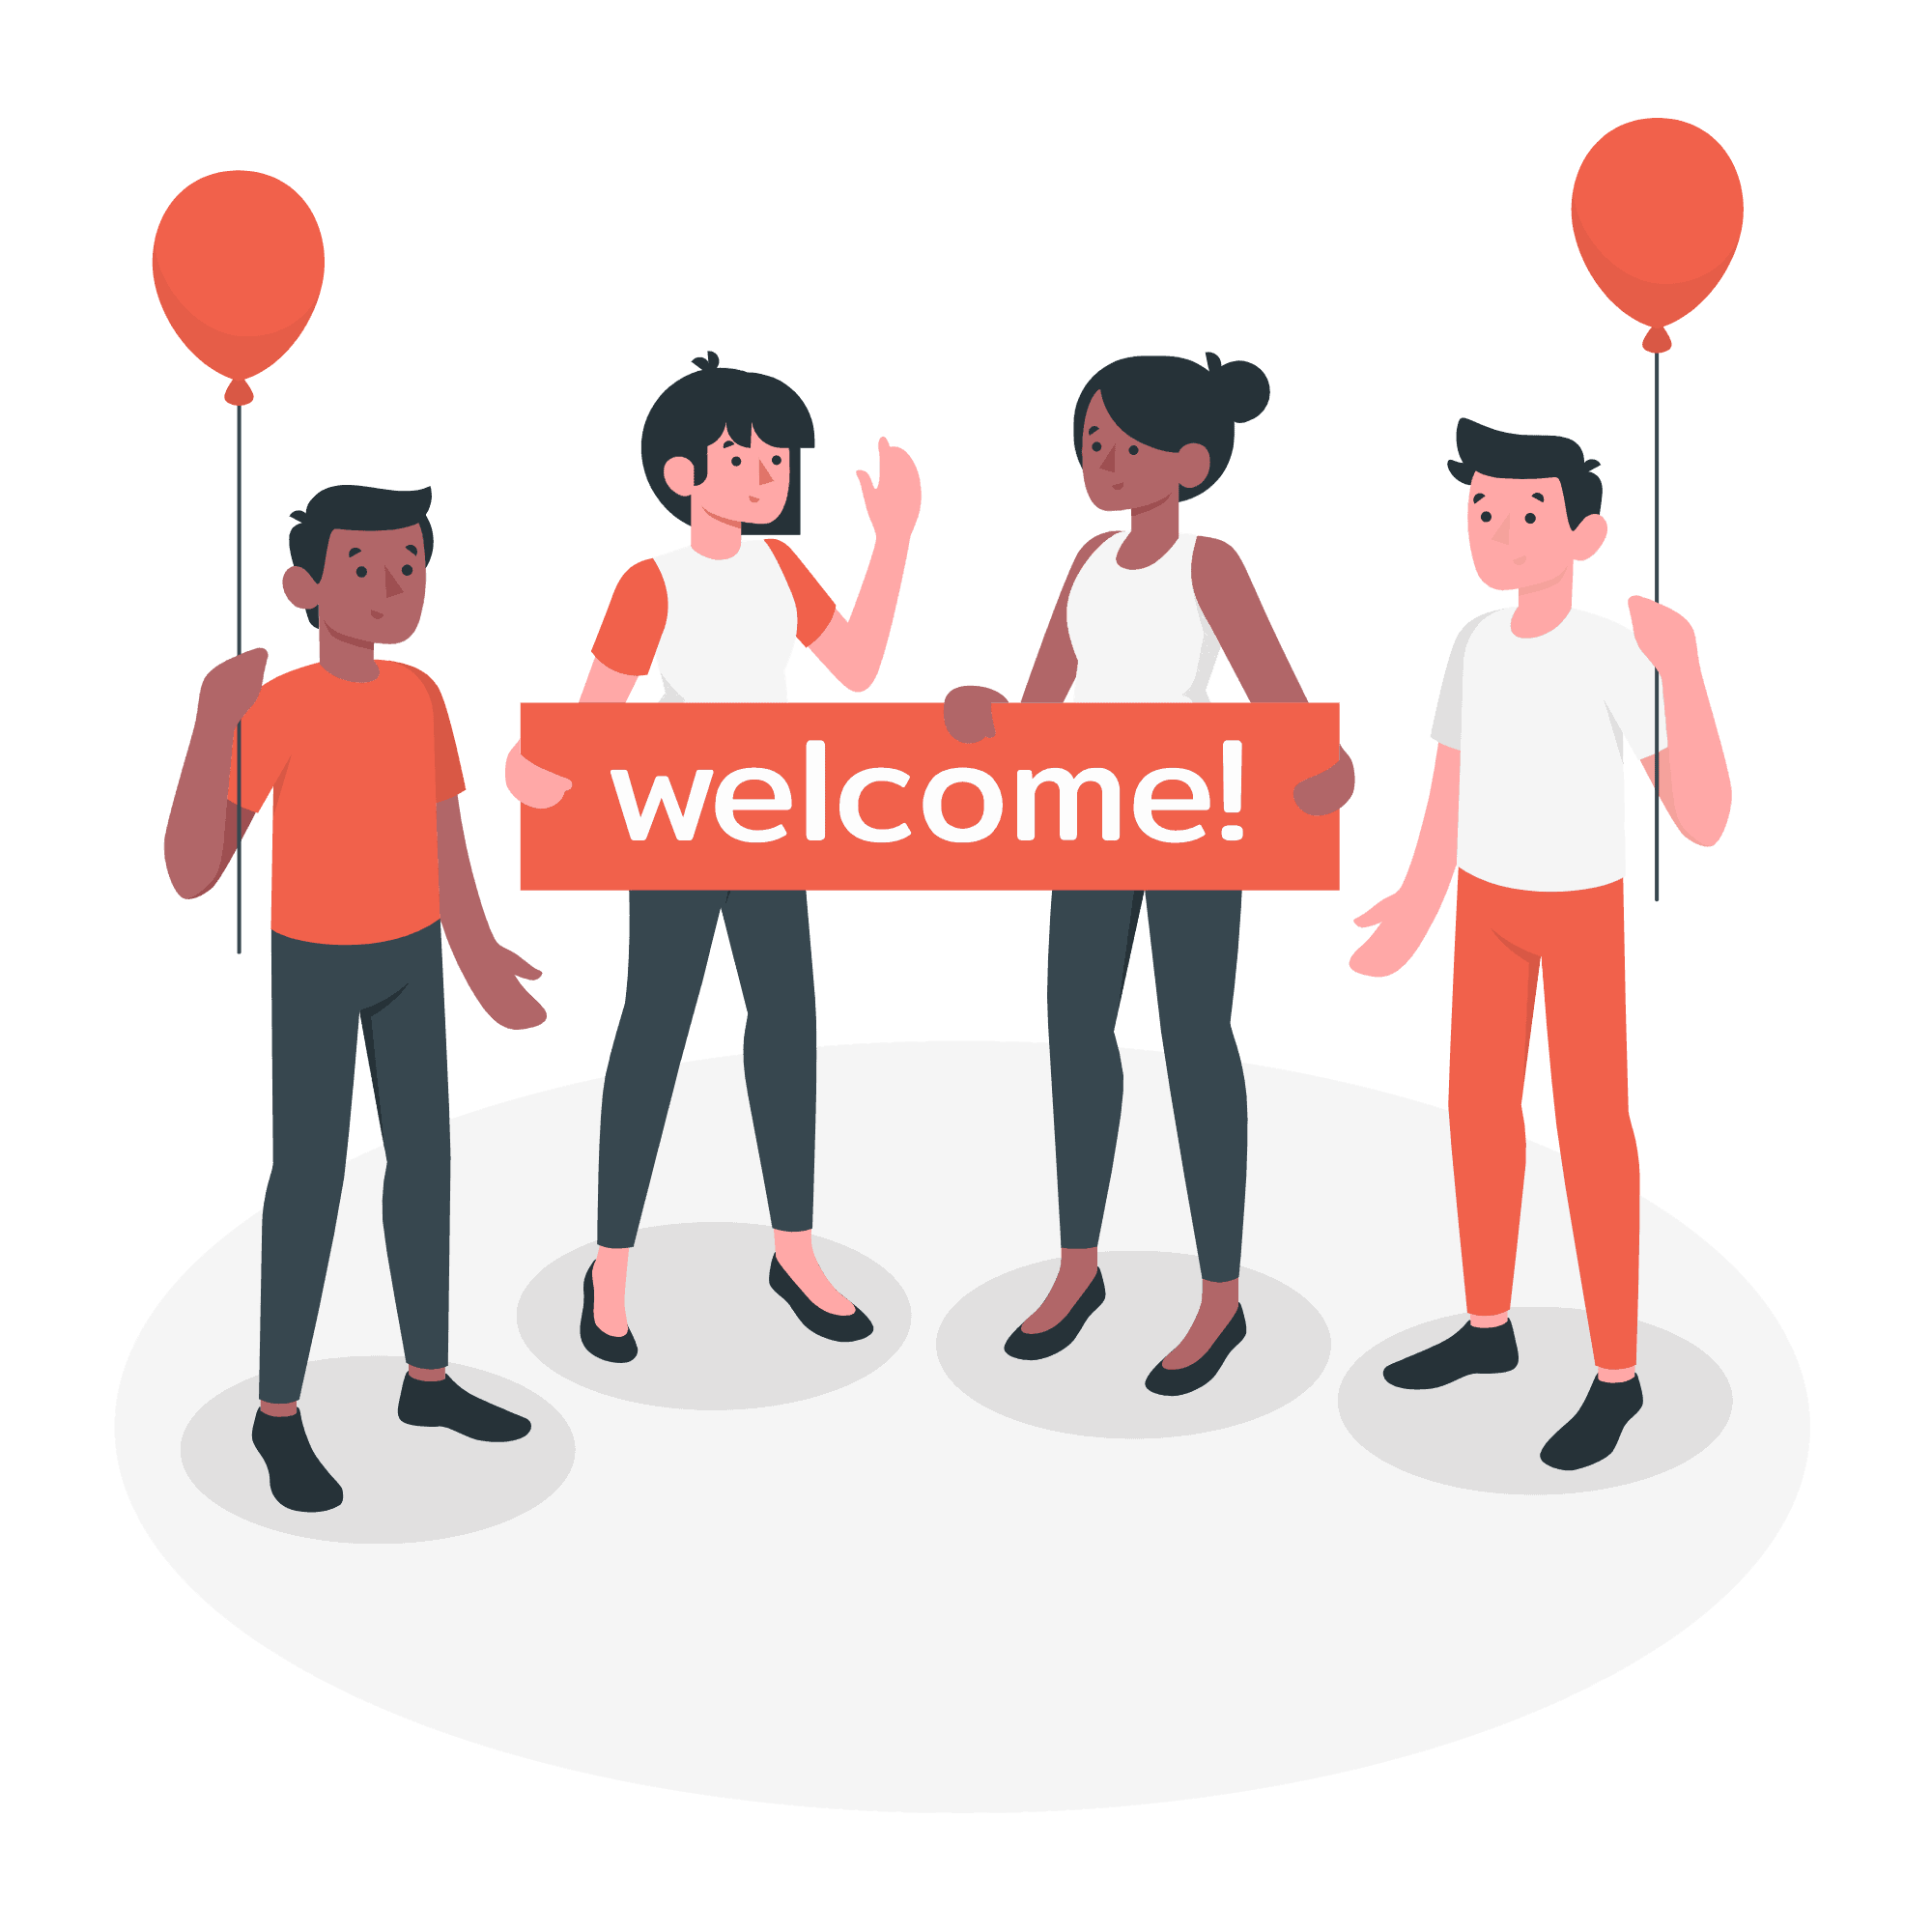 welcome to the event graphic